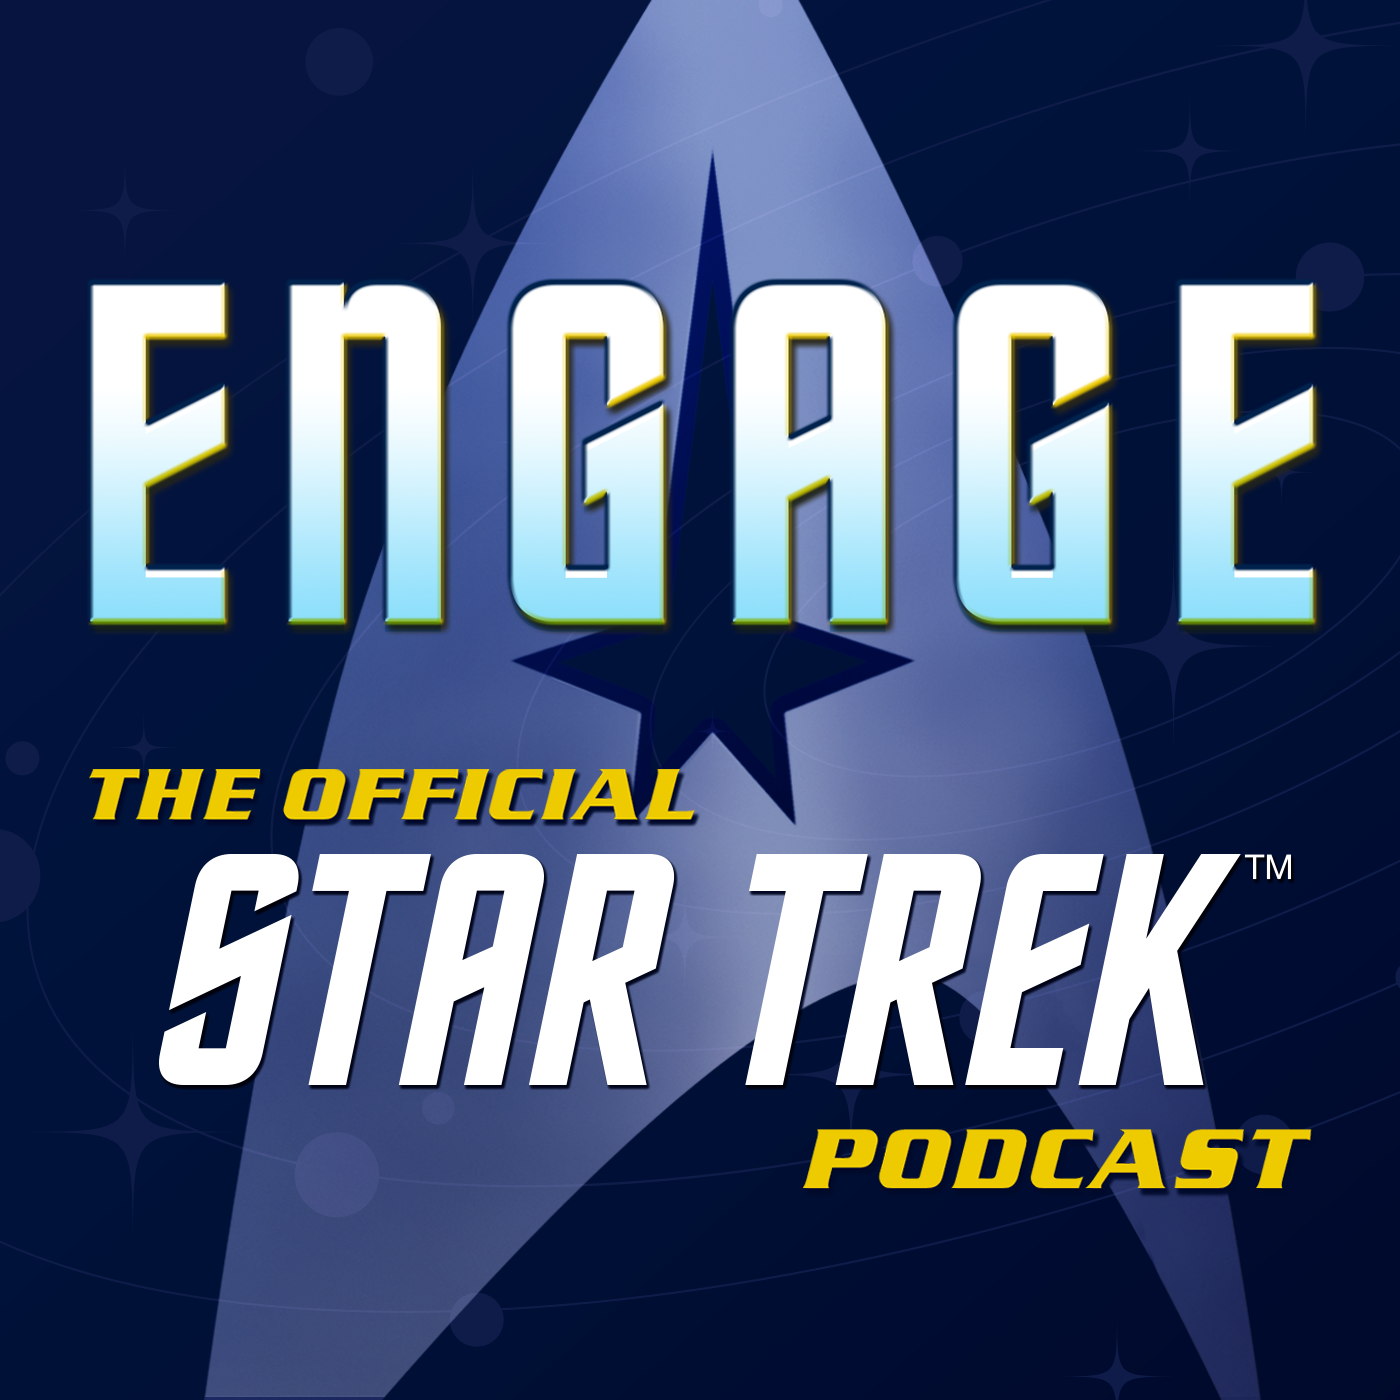 Engage: The Official Star Trek Podcast podcast show image